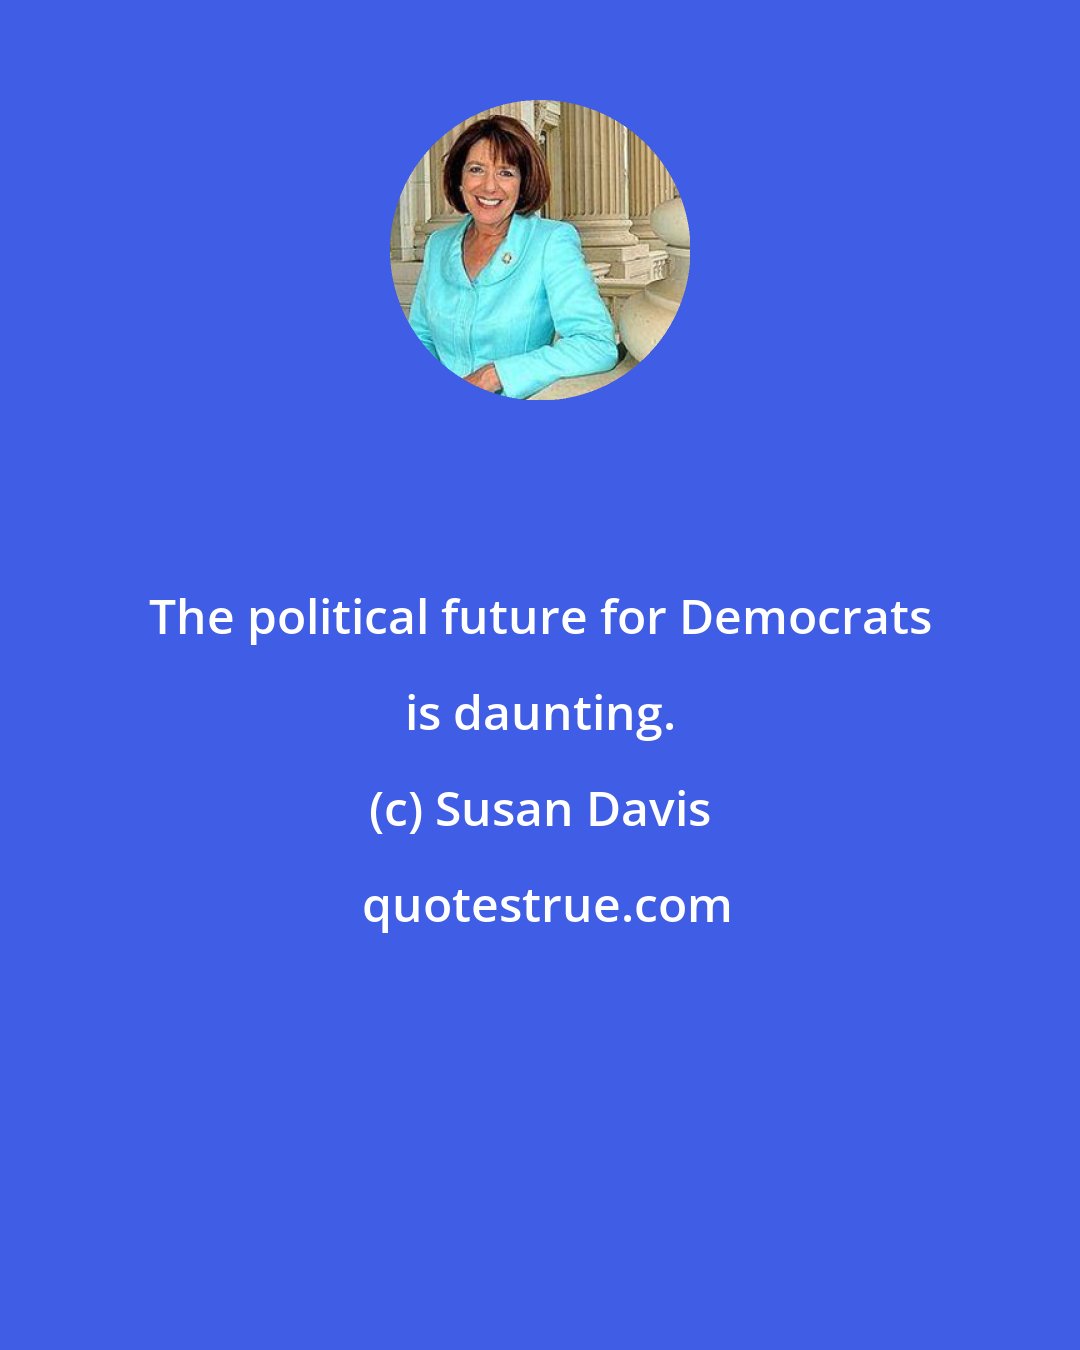 Susan Davis: The political future for Democrats is daunting.